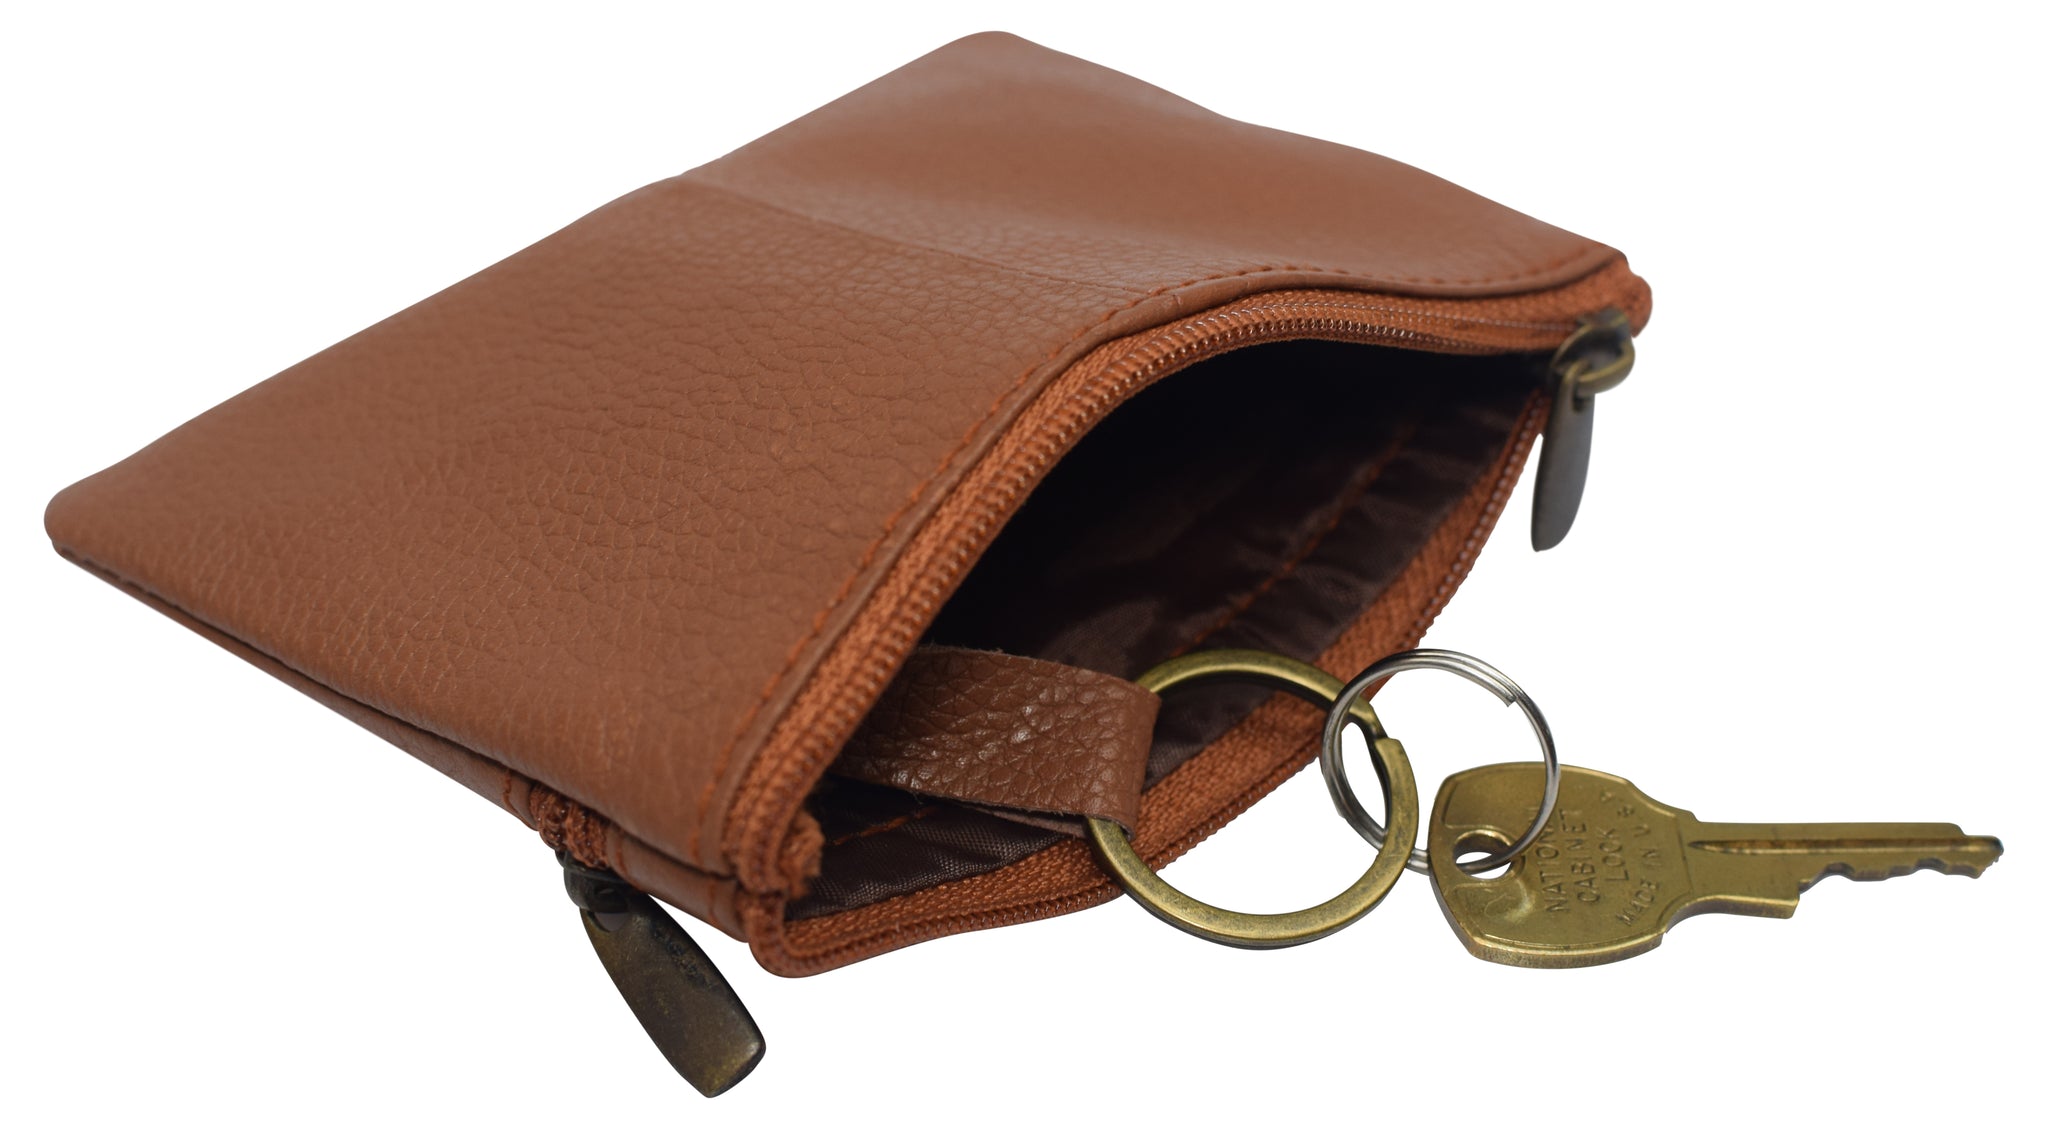  Genuine Leather Coin Pouch Change Holder for Men/Woman